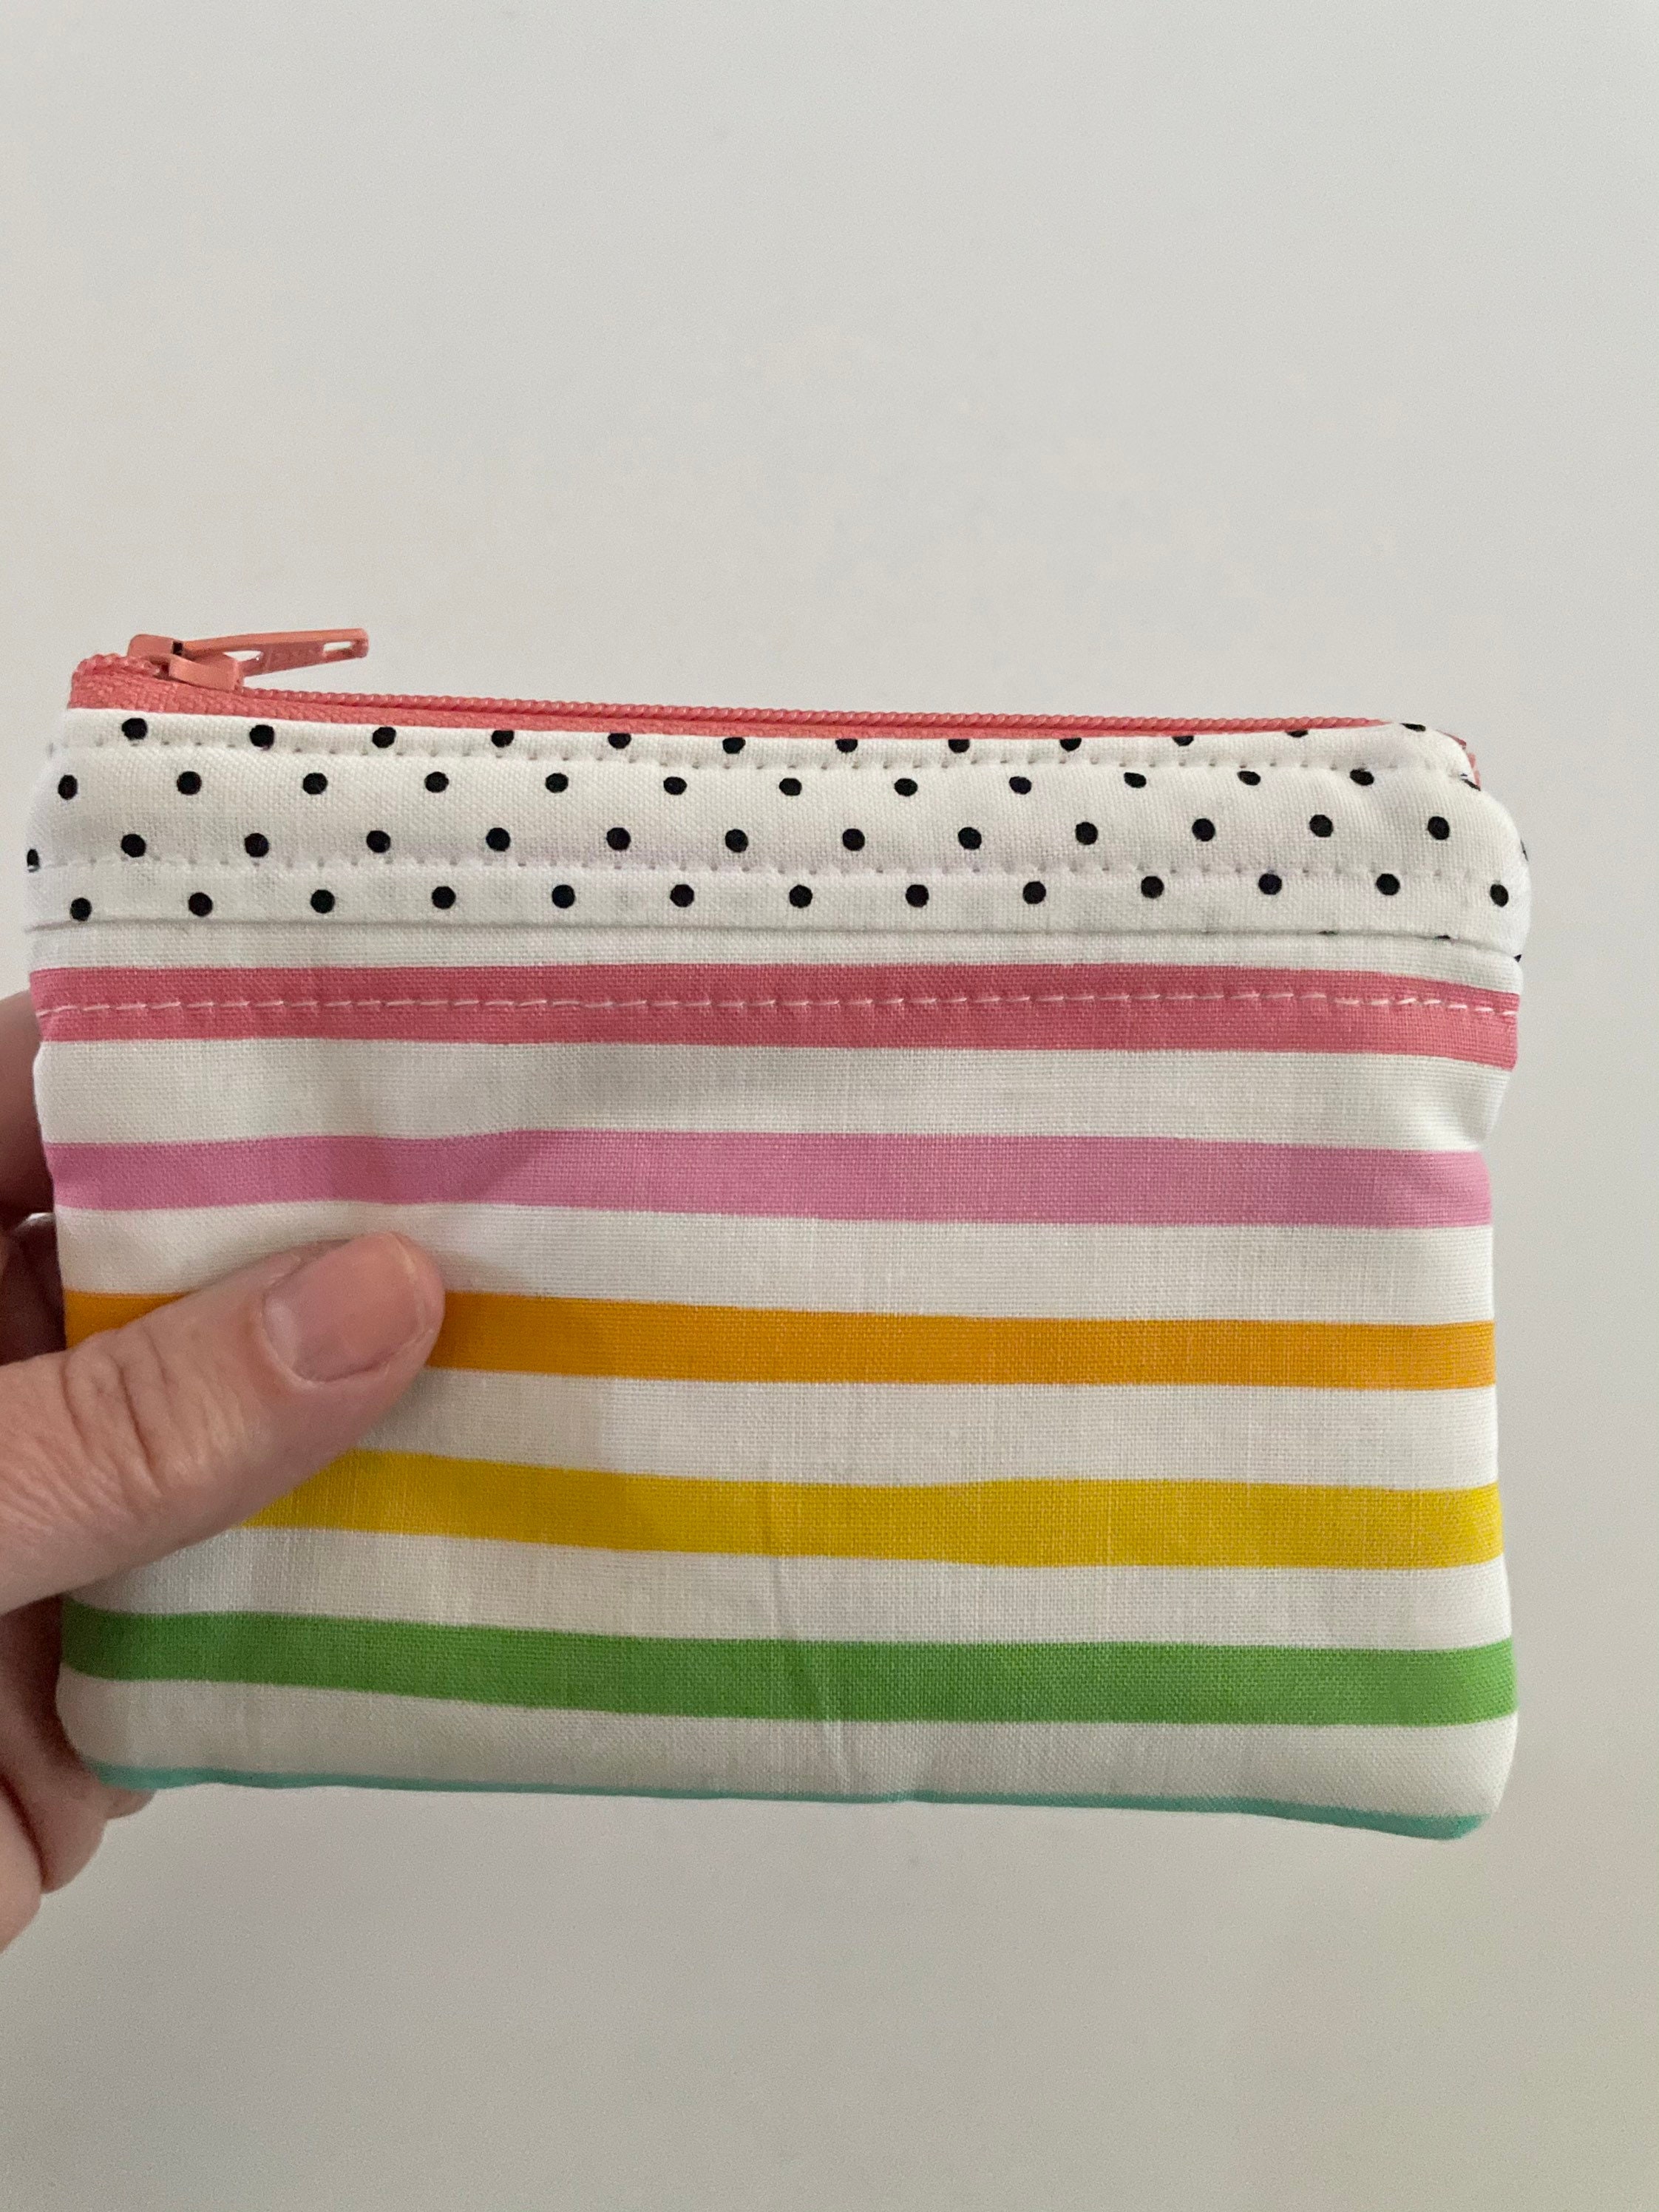 Cottagecore Small Zipper Pouch, Pouch With Zipper, Small Makeup